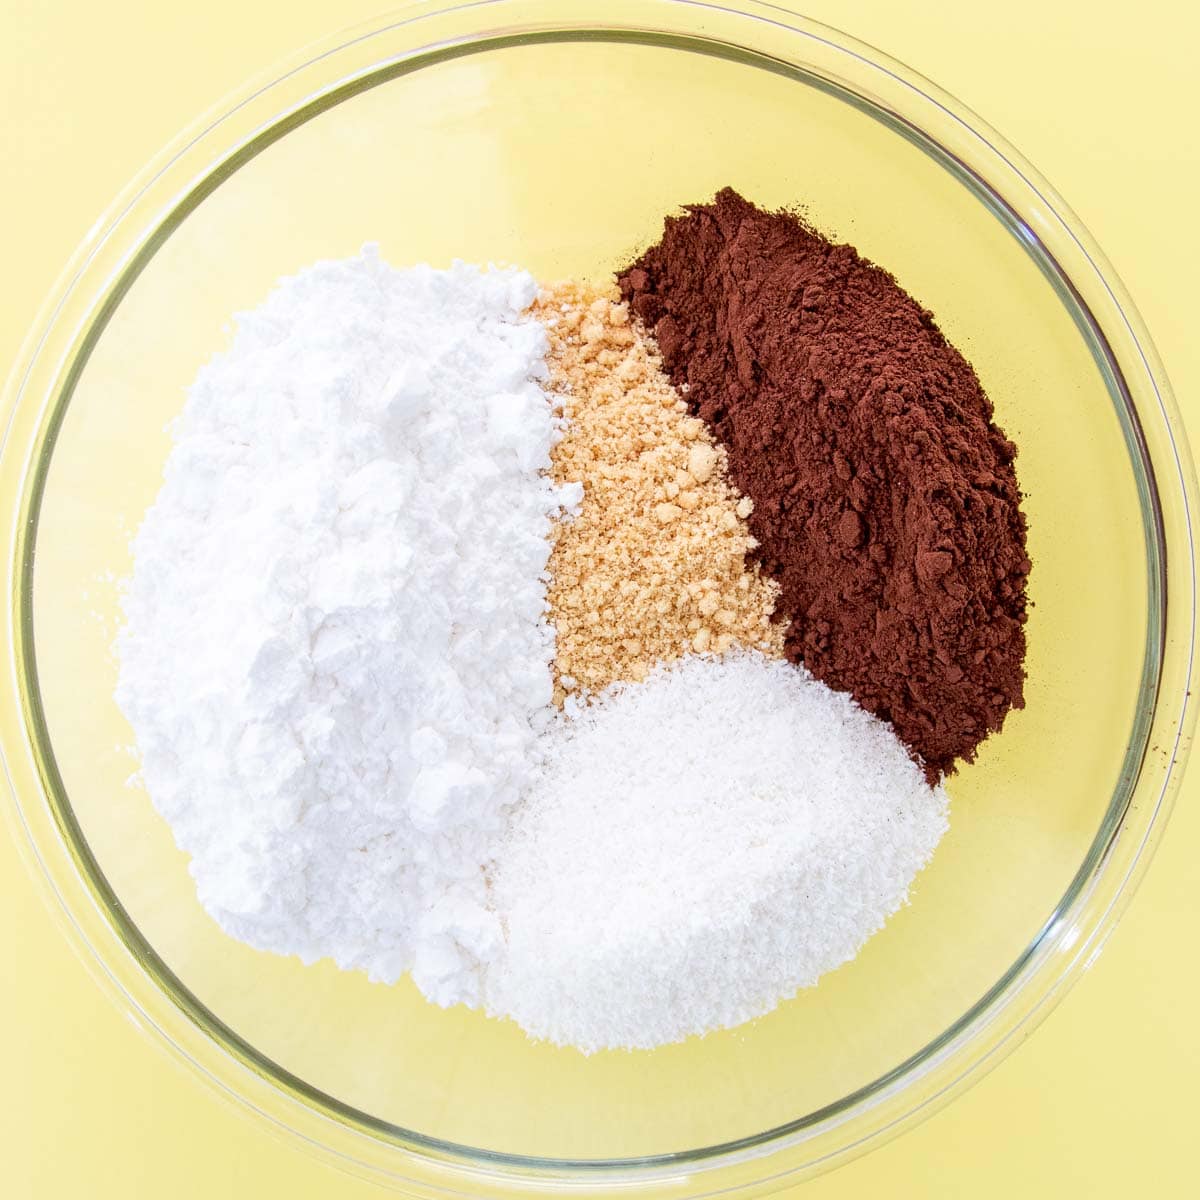 The crushed biscuits, cocoa powder, coconut and powdered sugar in a large glass bowl on a yellow background.